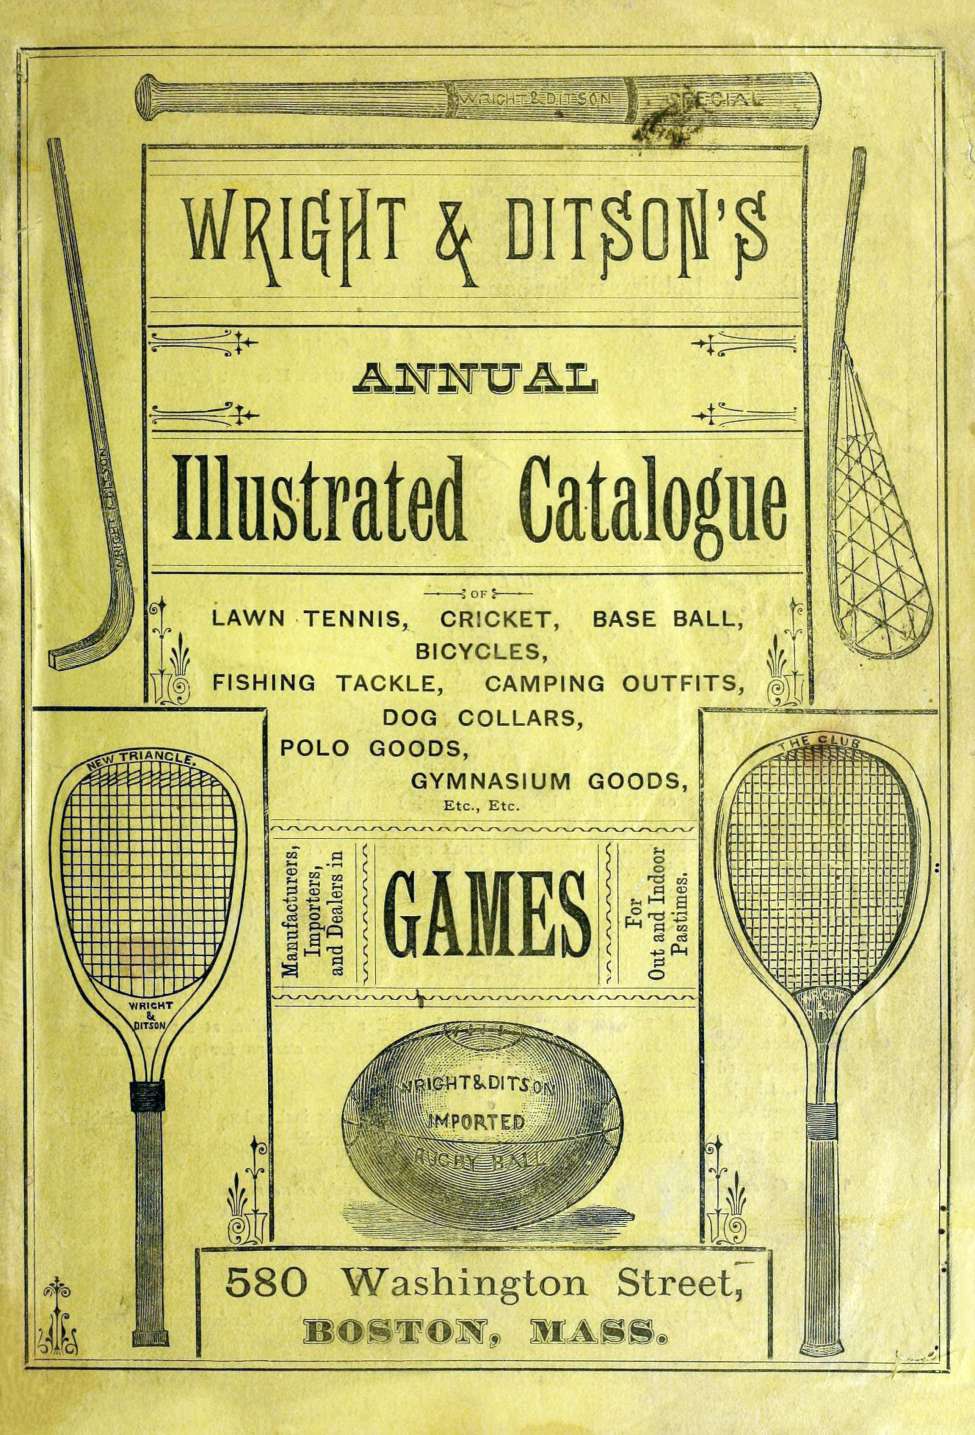 Book Cover For Wright and Ditsons Annual Illustrated Catalogue